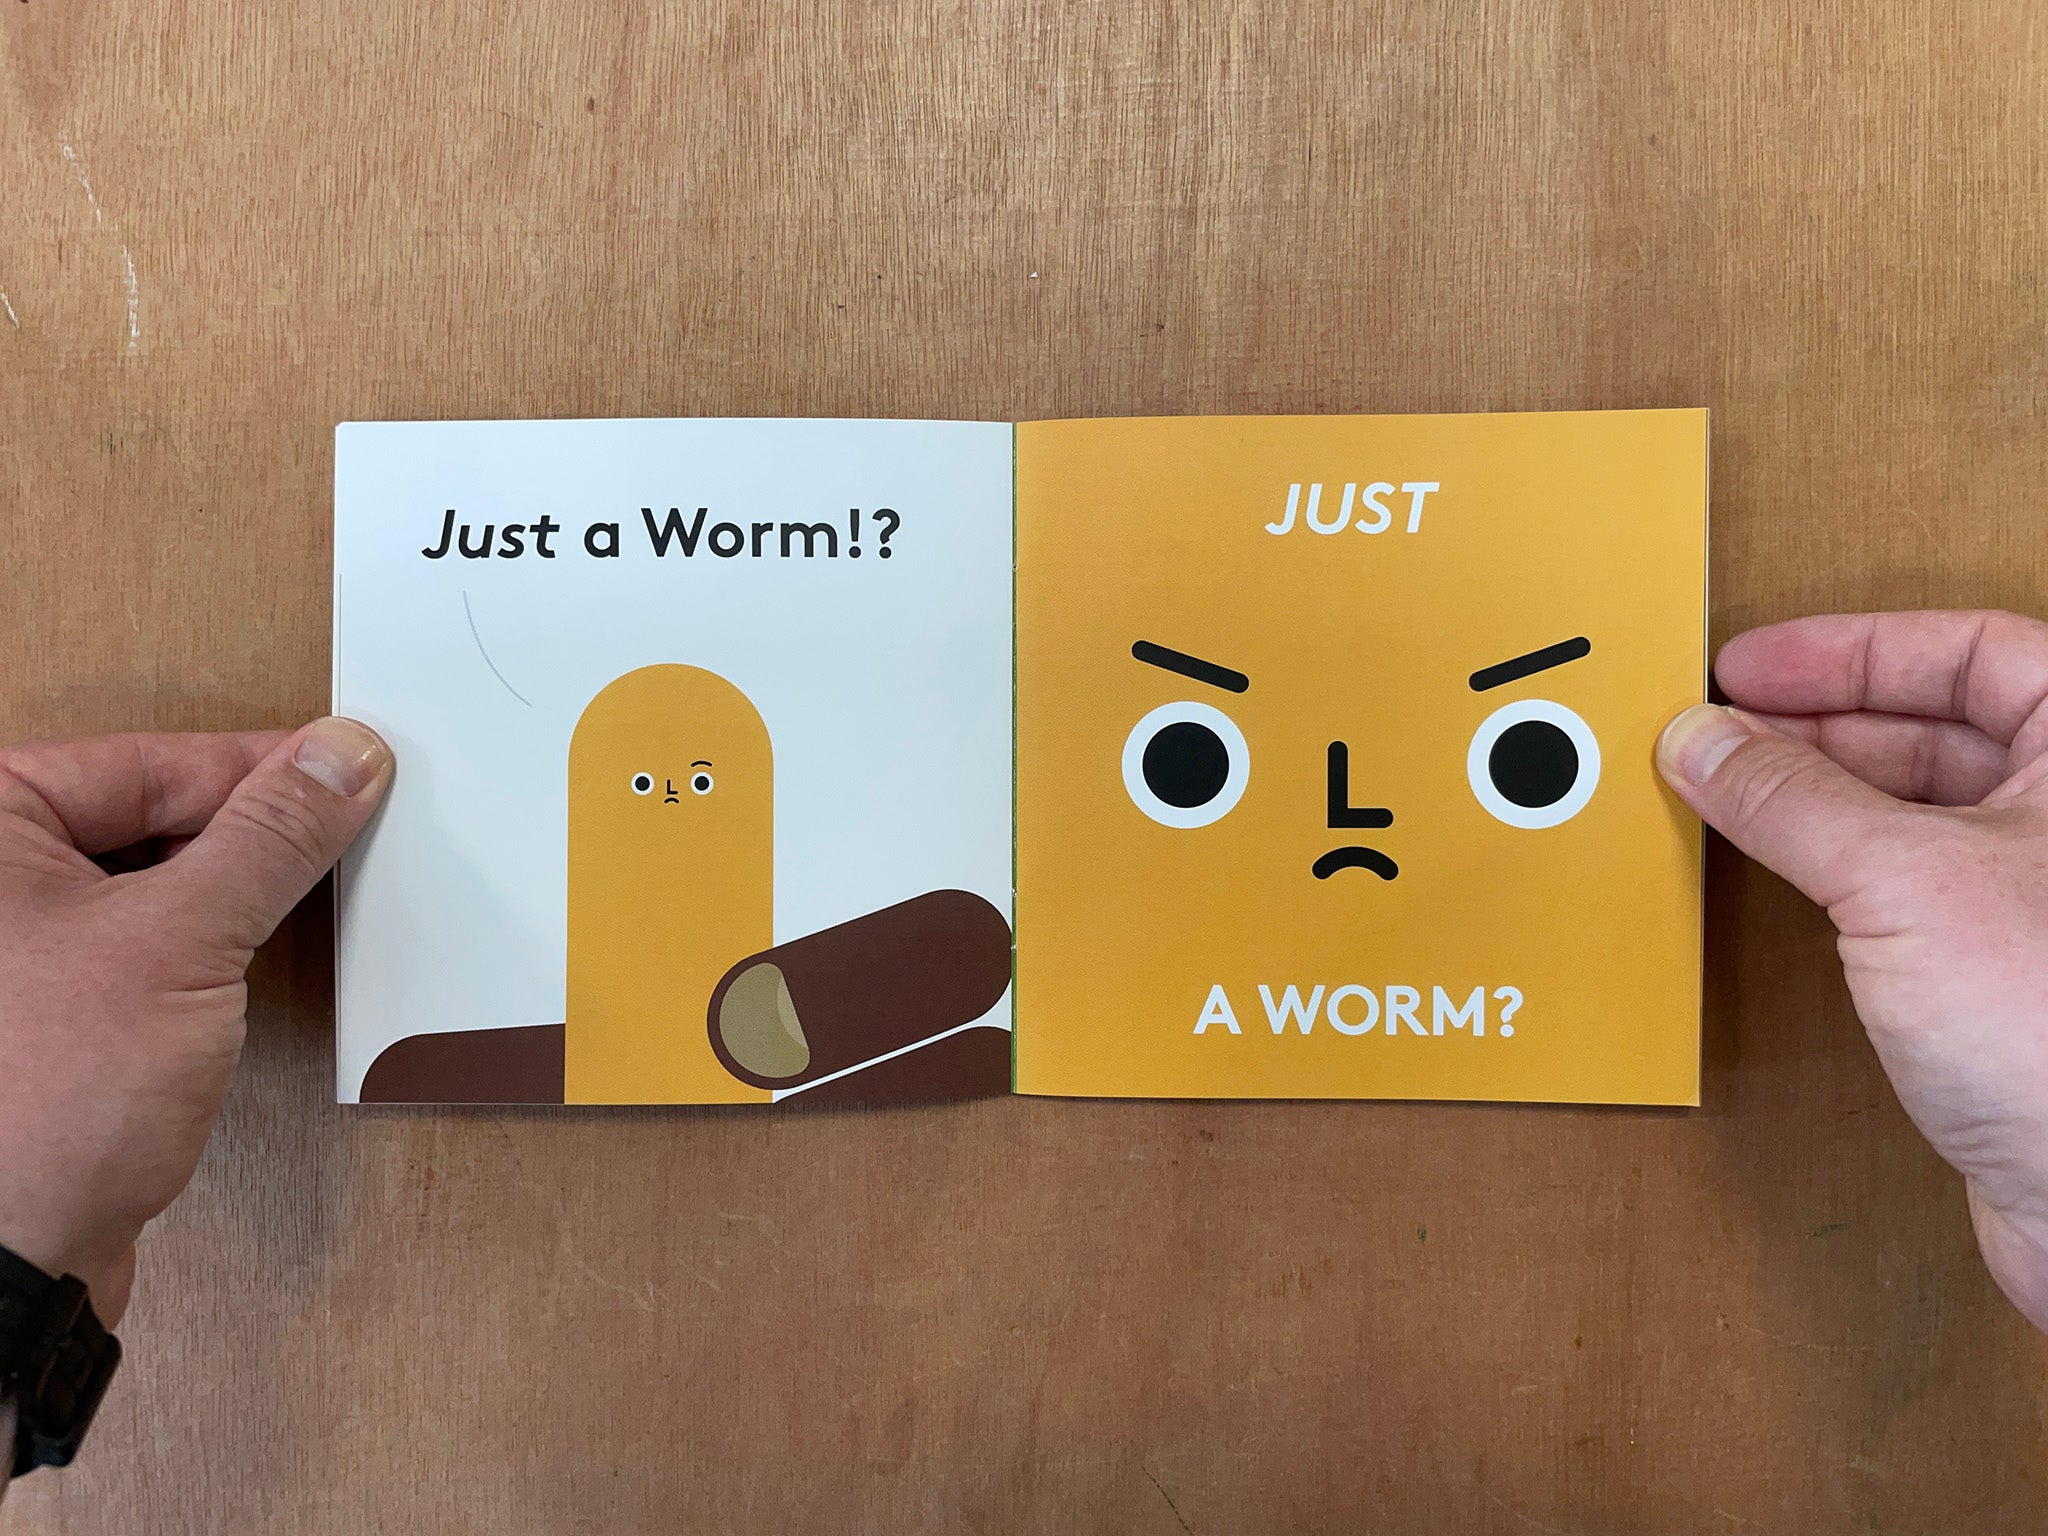 JUST A WORM by Jason Kerley